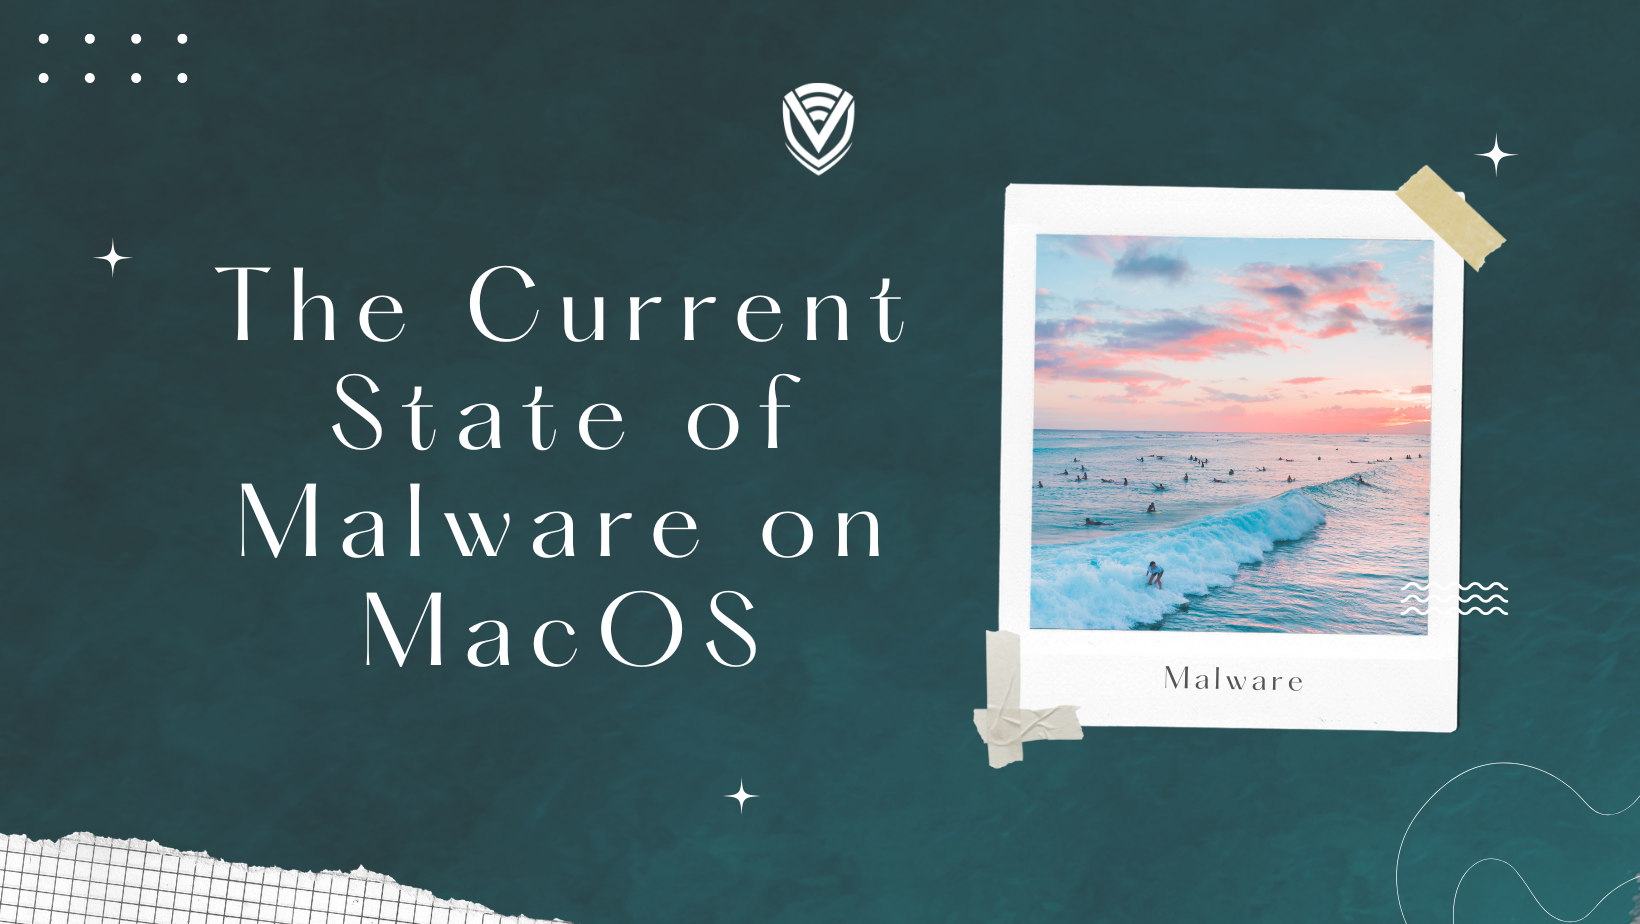 The Current State of Malware on MacOS